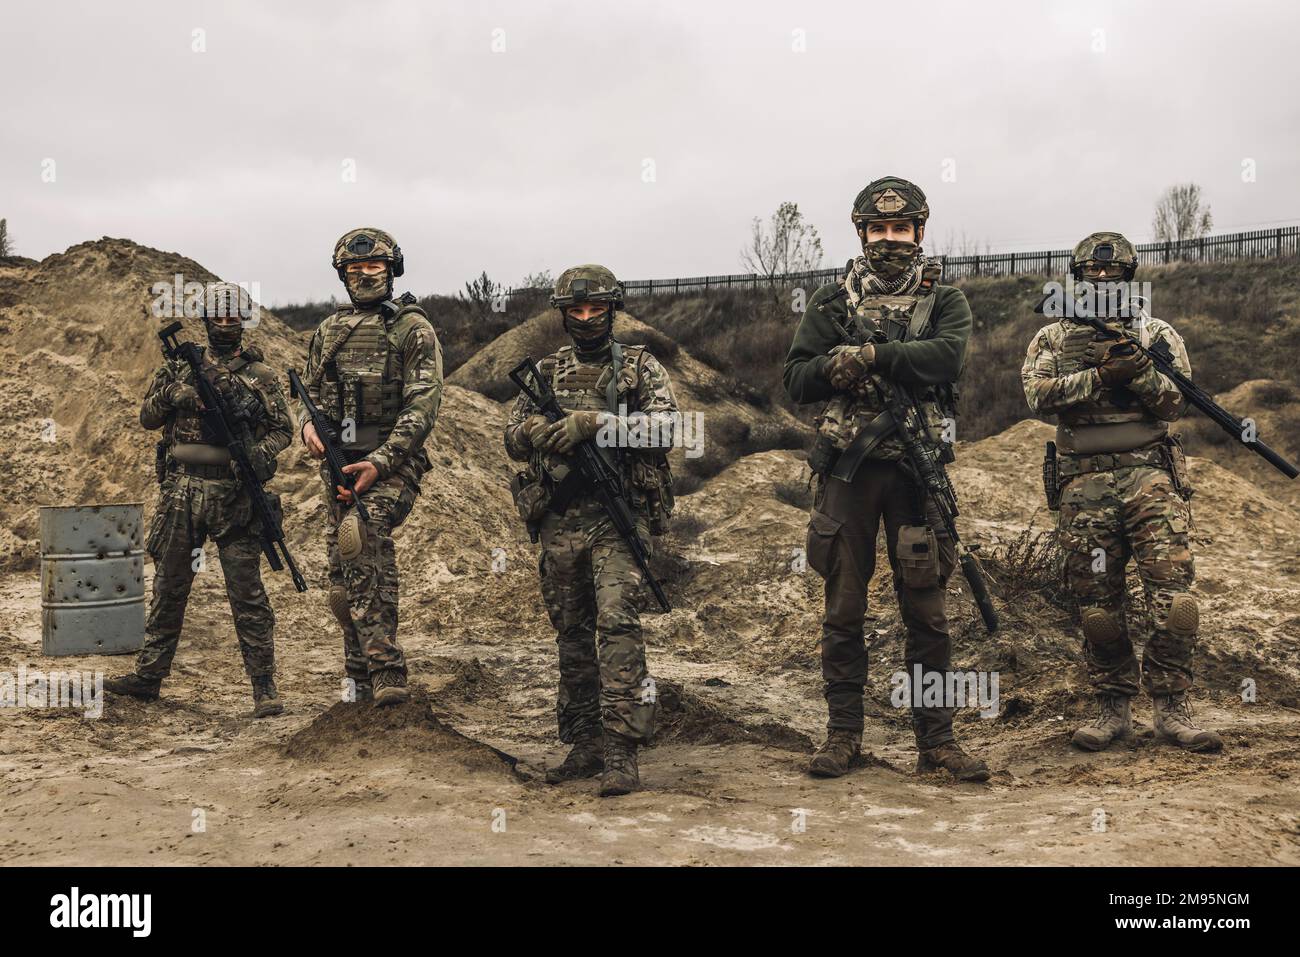 Soldiers on a shooting range looking concentrated and attentive Stock Photo